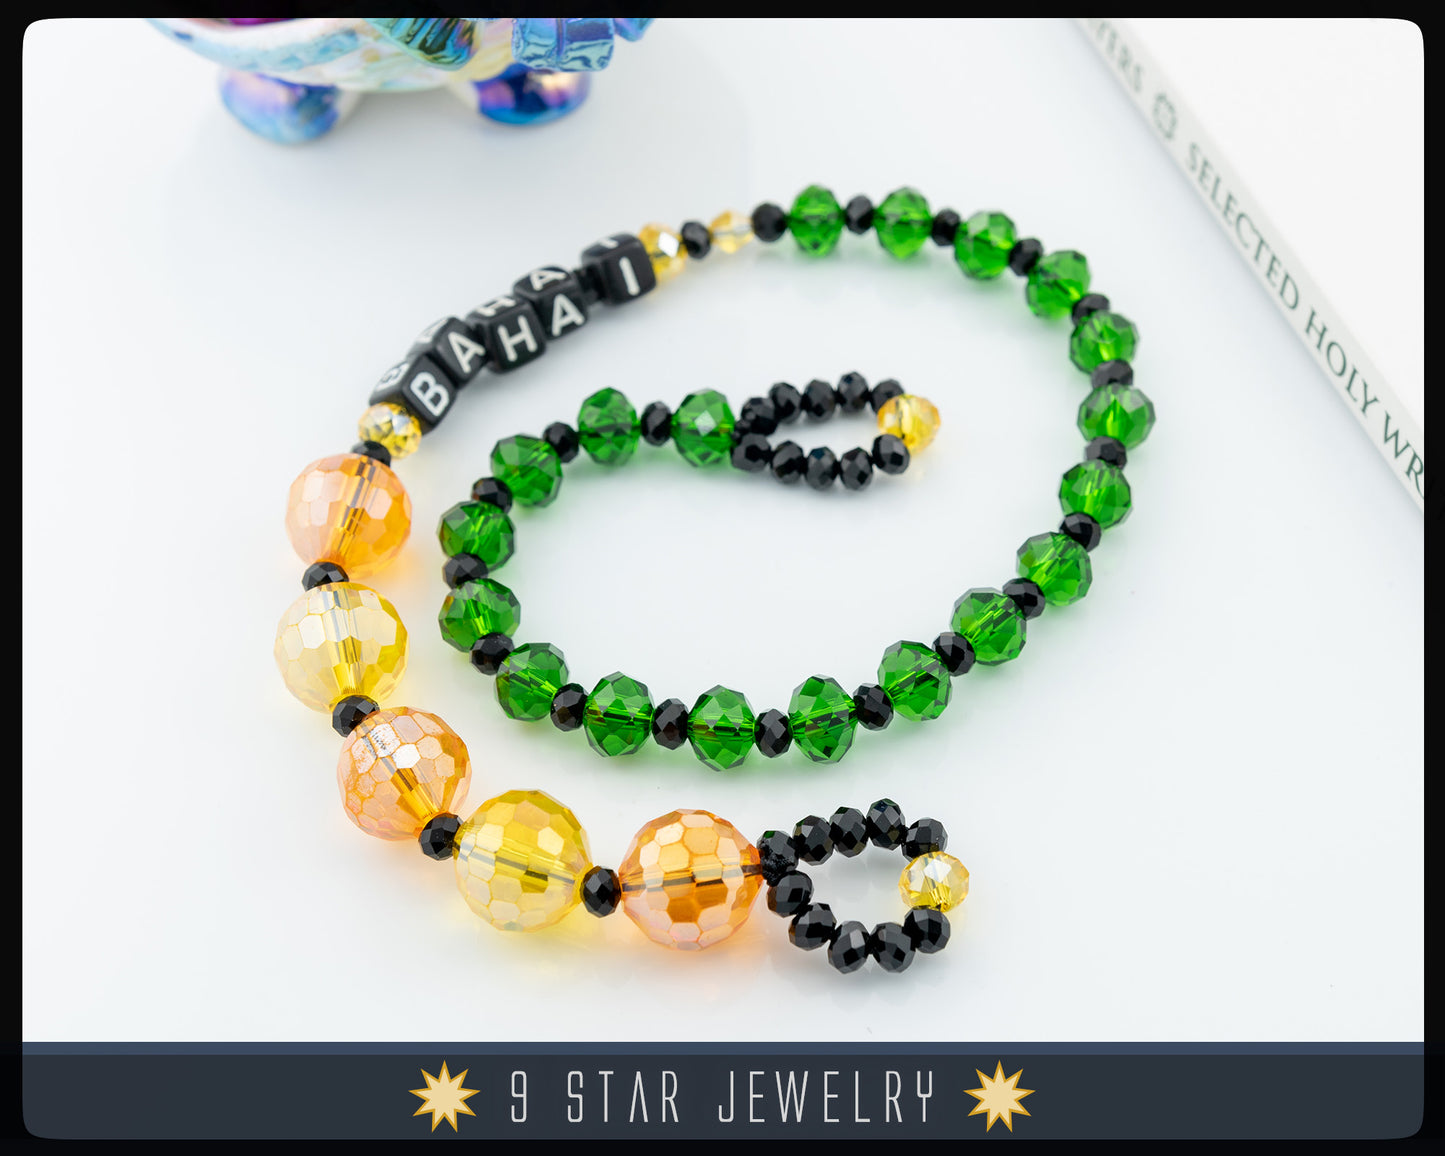 Orange Yellow and Green Glass Beads with Letters "Baha'i" Prayer Beads "Grandeur"